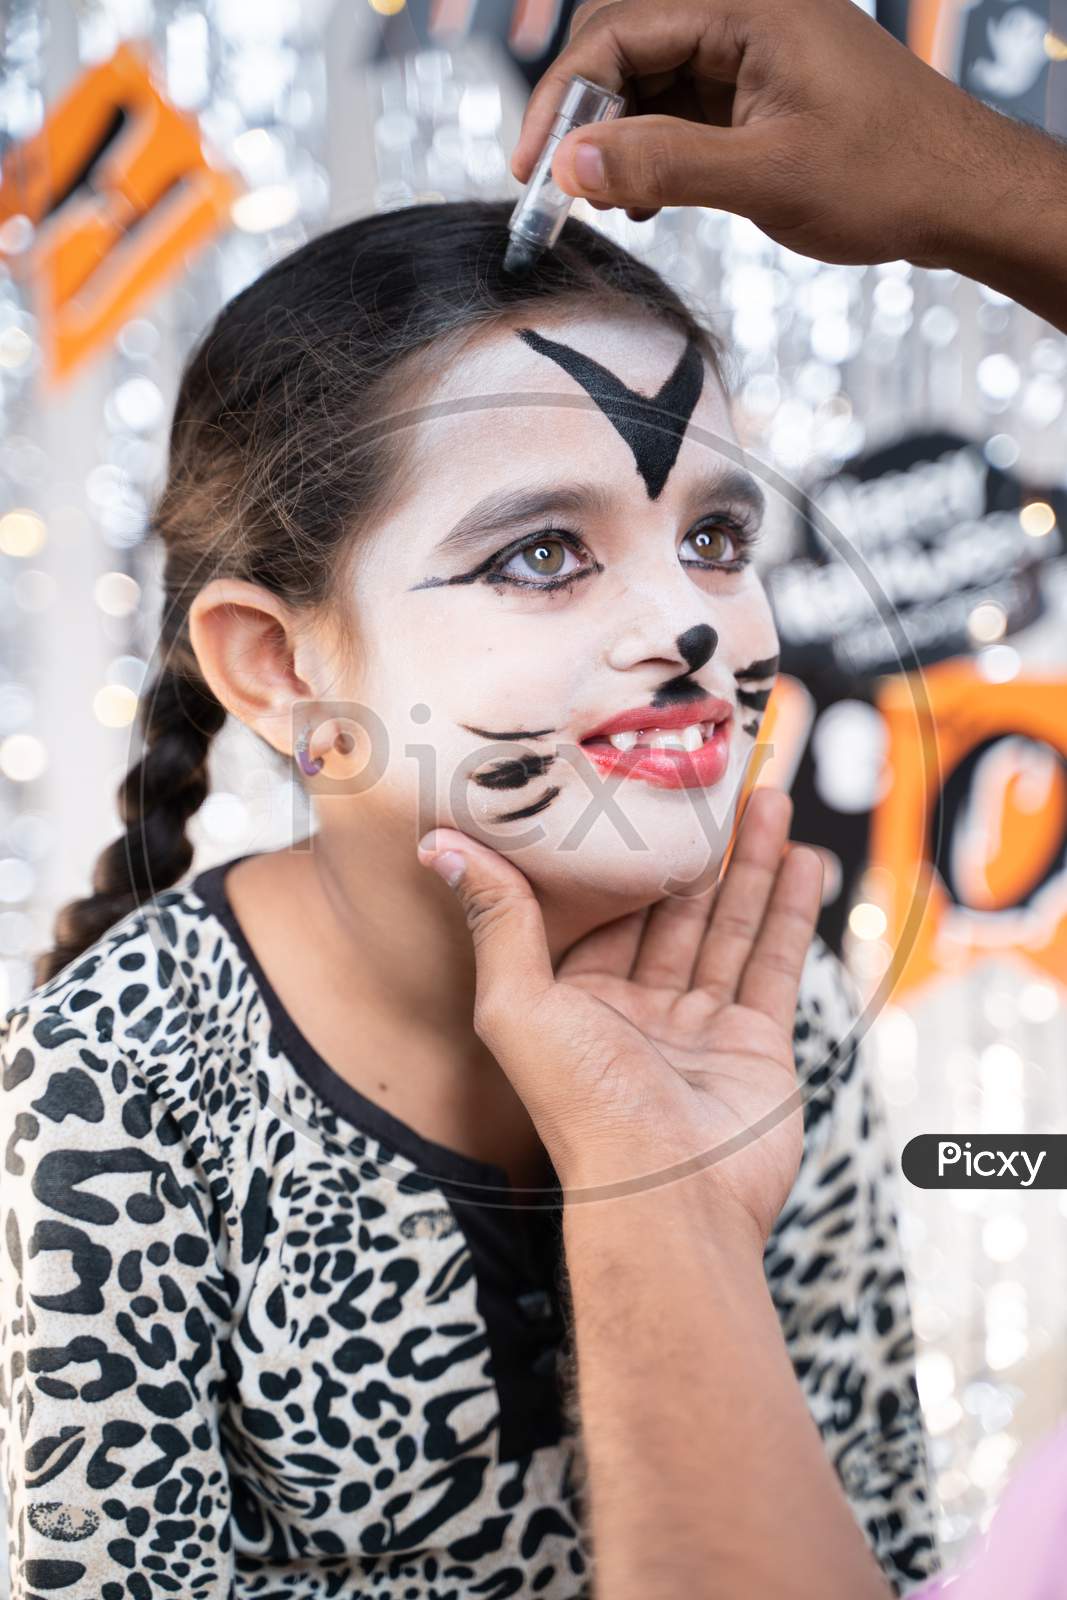 Parent Helping Her Daughter To Get Ready For Halloween By Doing Make-Up - Concept Of Halloween, Holiday And Childhood Festival Celebration And Preparation.